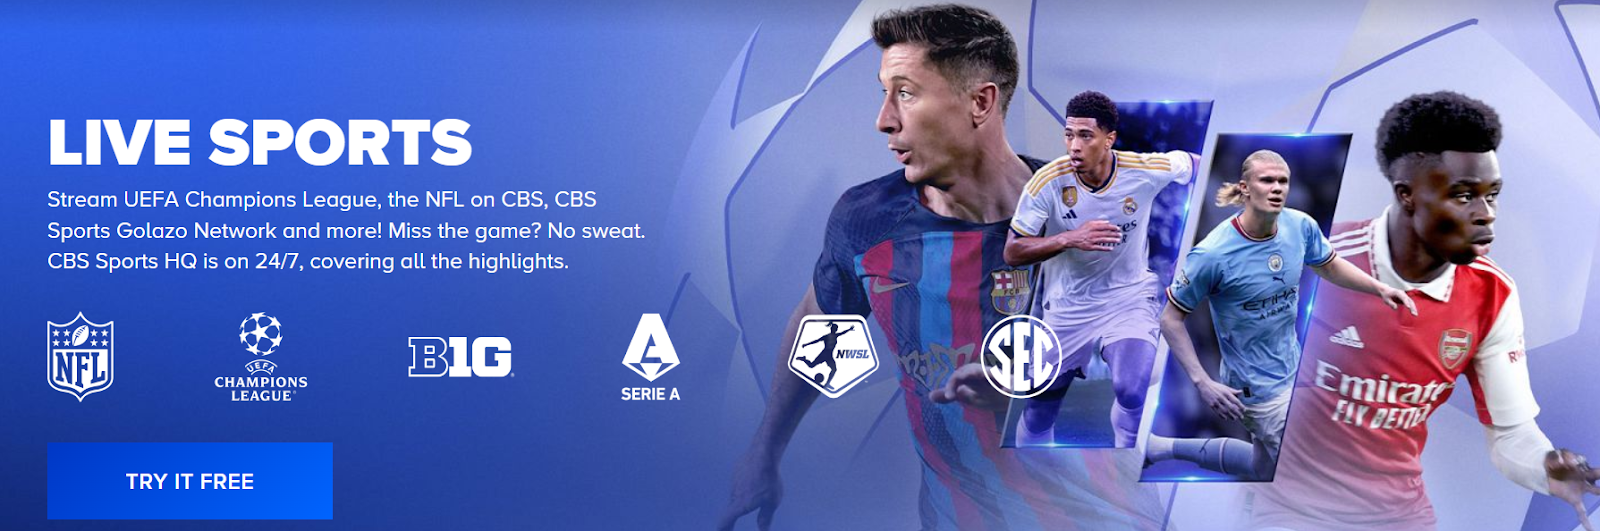 Live Sports on CBS Sports App incudes UEFA Champions League, NFL, and more